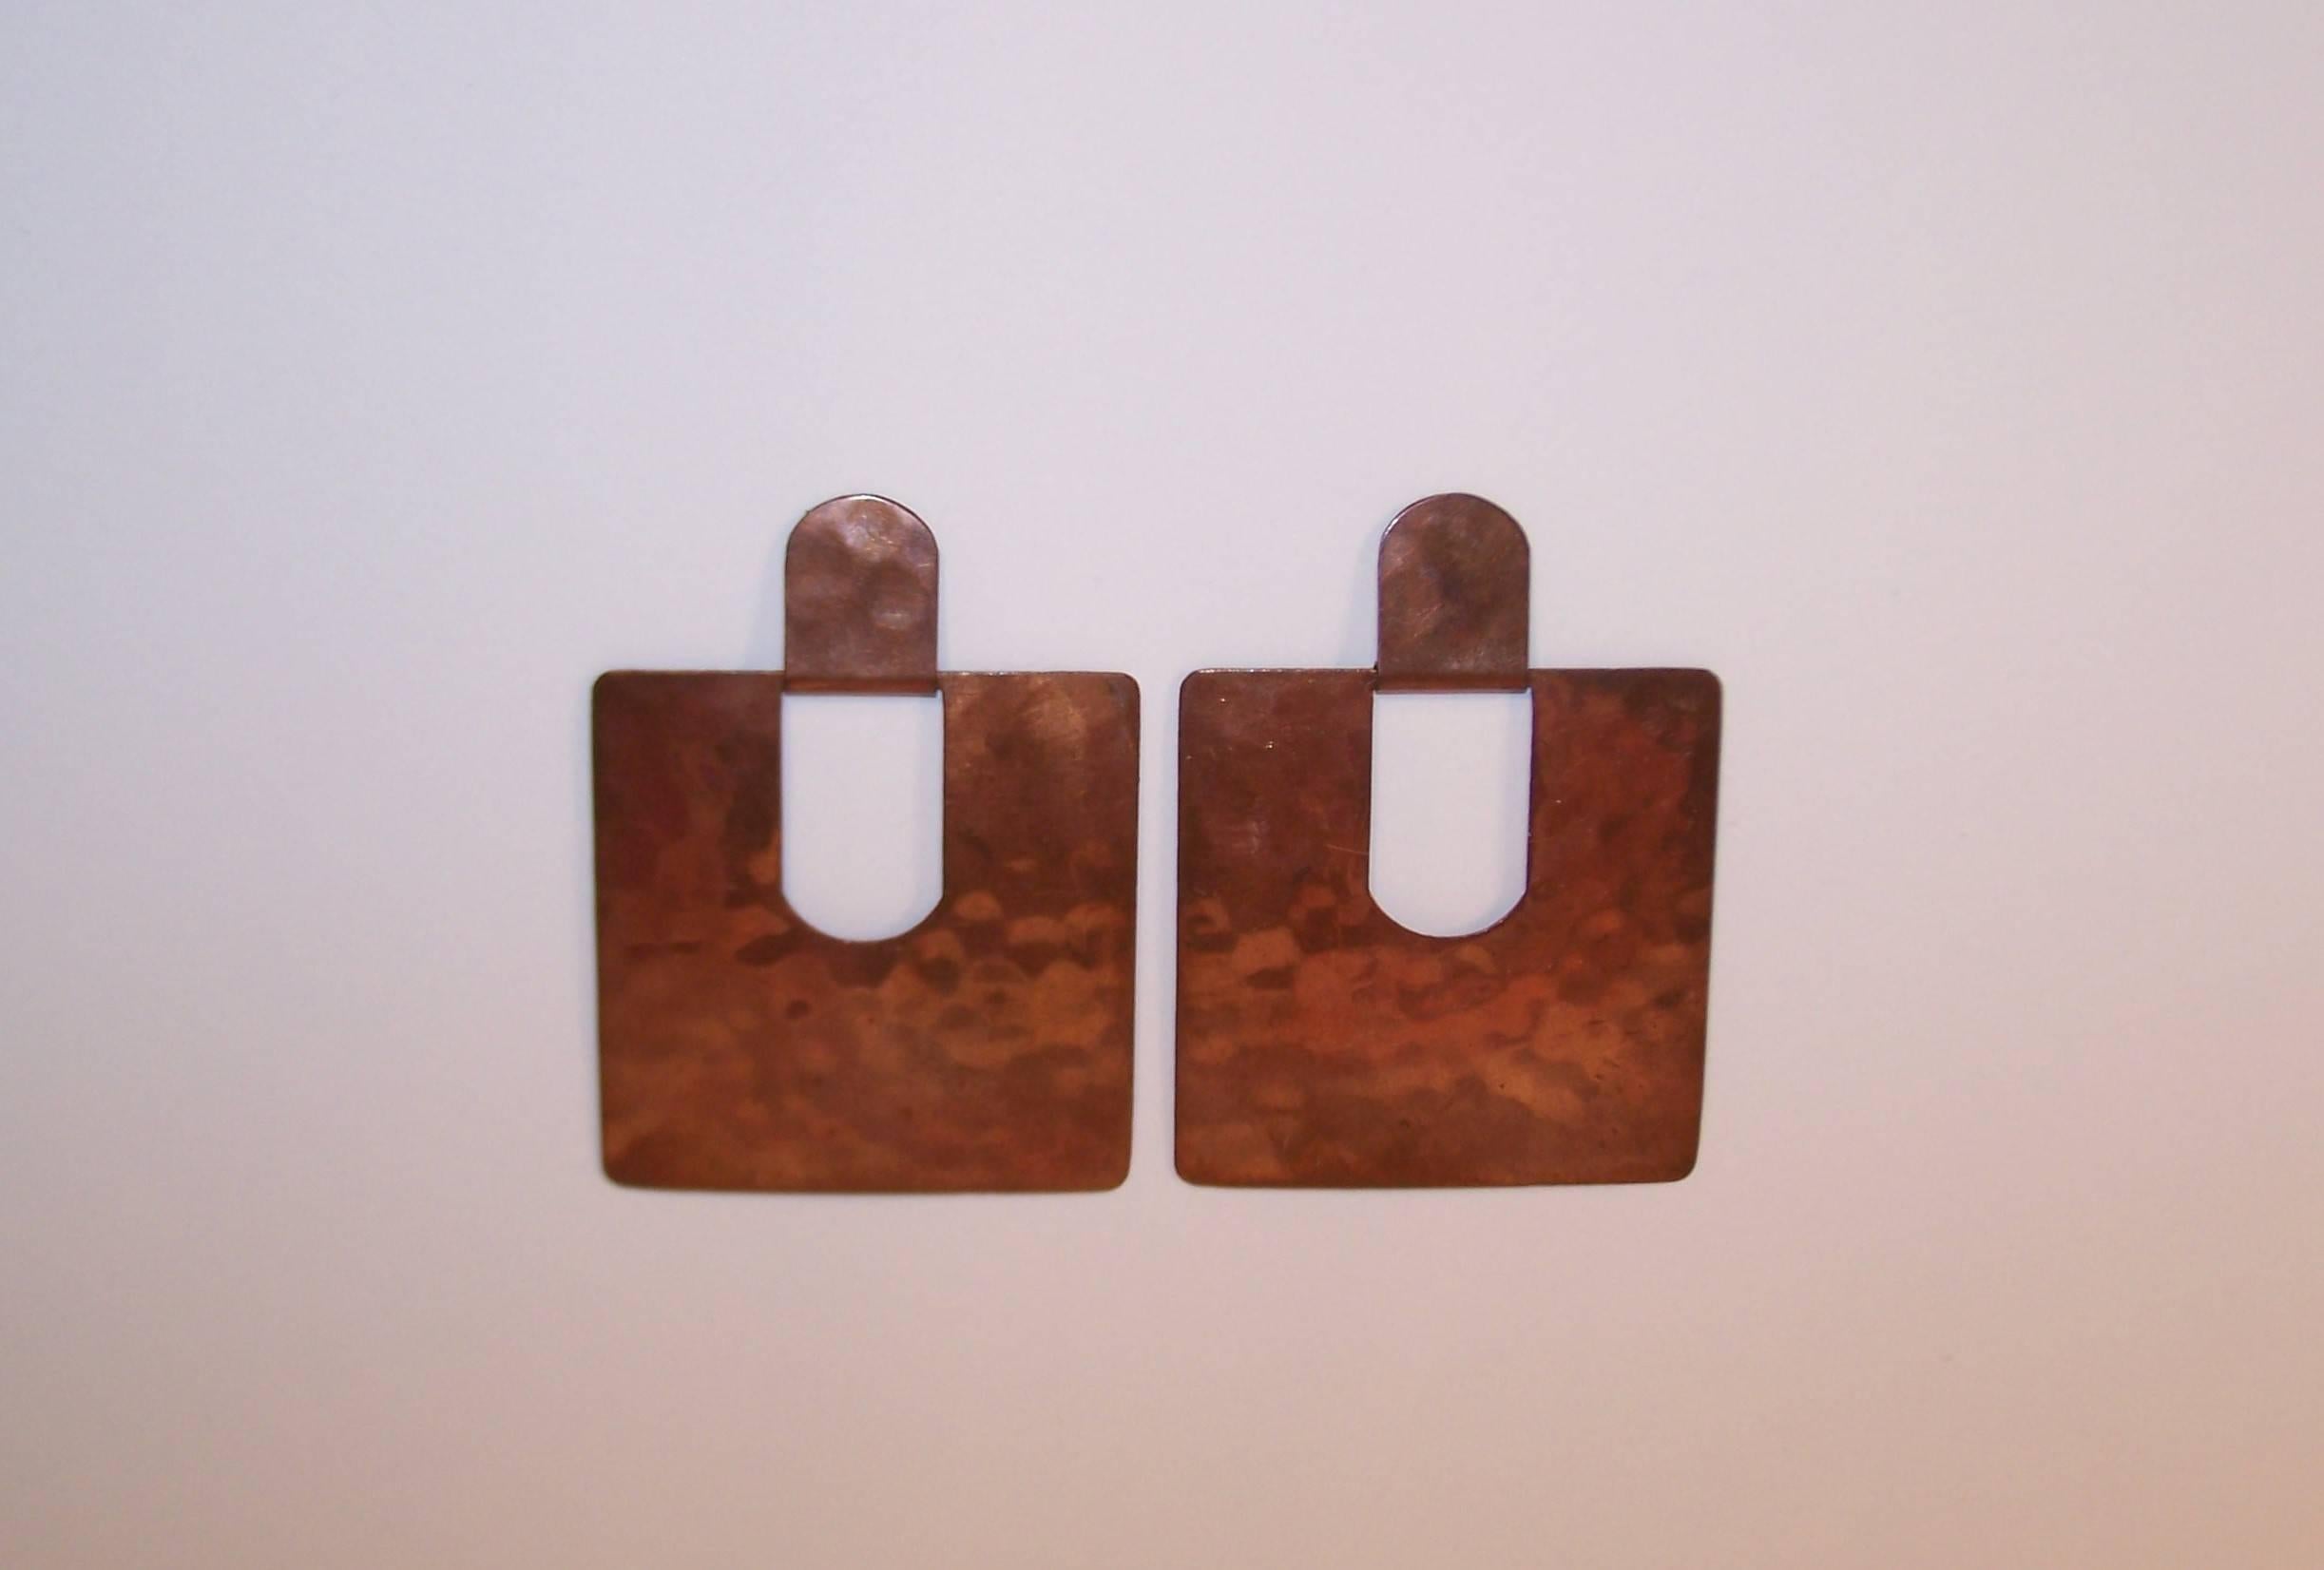 Love these earrings!  They are an amazing combination of modernist design and lightweight comfort.  The hand hammered flat copper components are hinged together in a doorknocker style providing a play on negative space.  They subtly swing back and